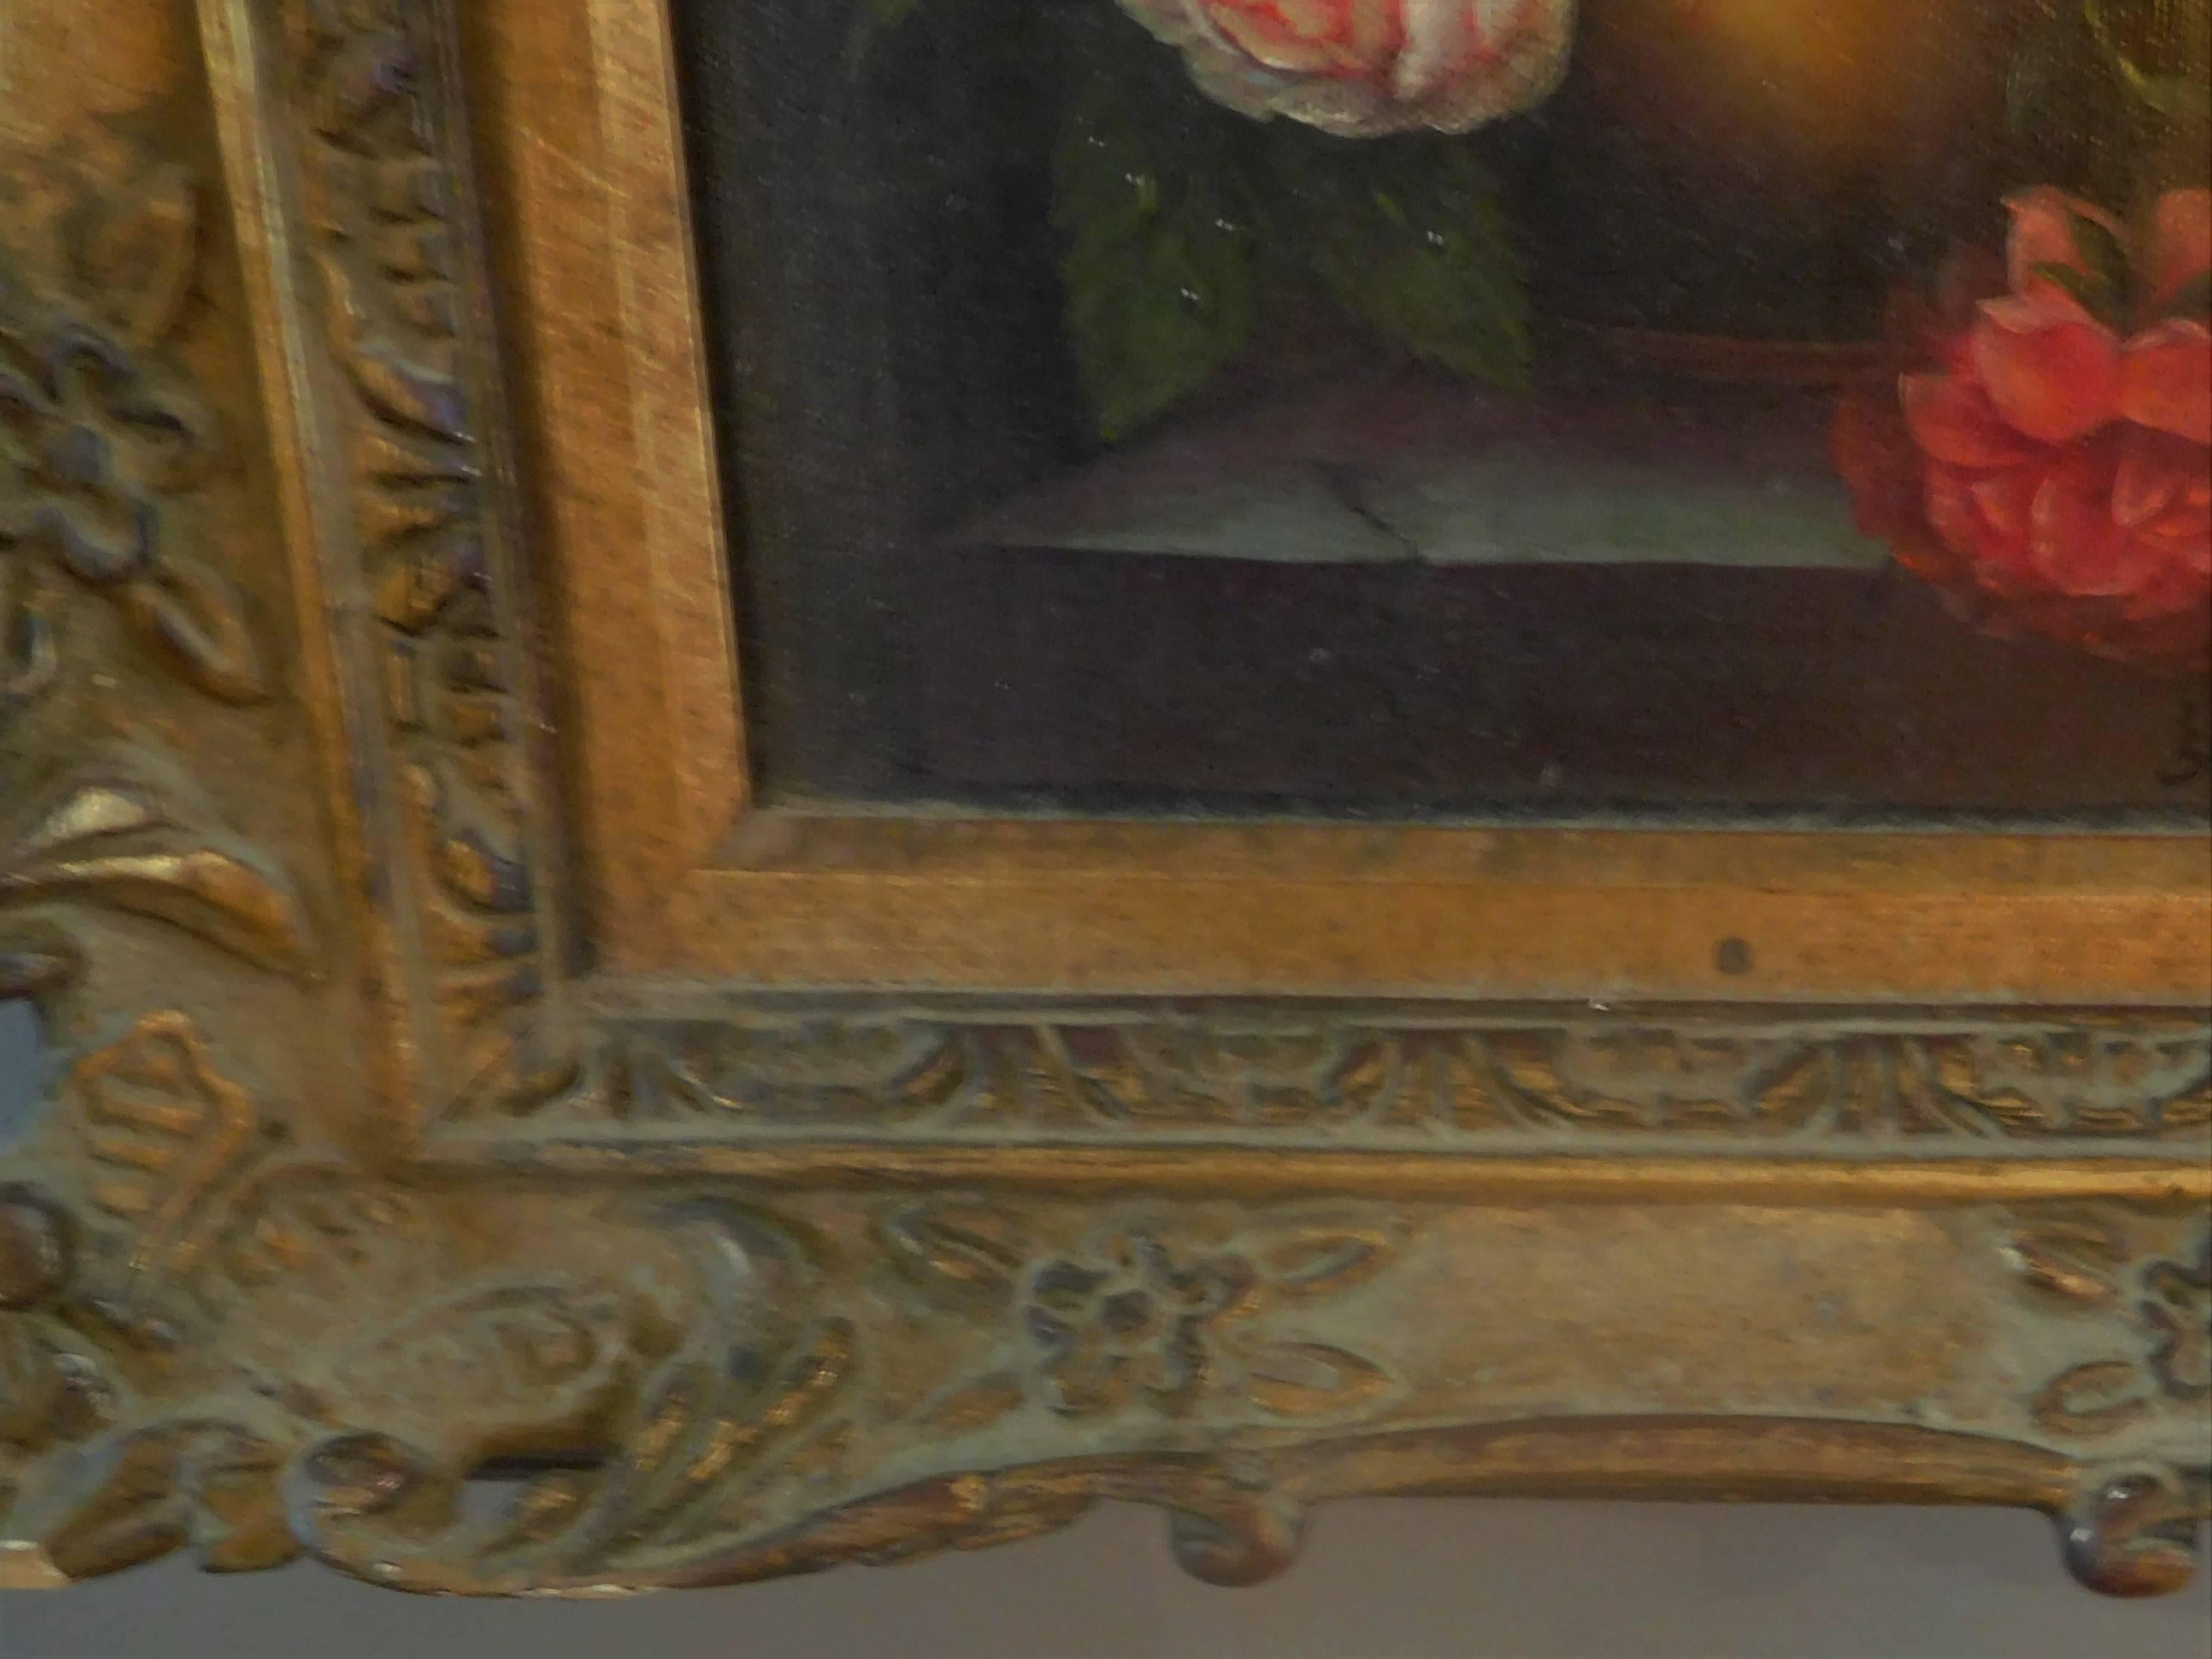 This little painting by Austrian artist Josef Kamenitzky Steiner (1910-1981) is signed in the lower right. It was painted circa 1955 and is in its original antiqued Beaux-Arts style frame. The painting depicts a fresh bouquet of flowers with dew